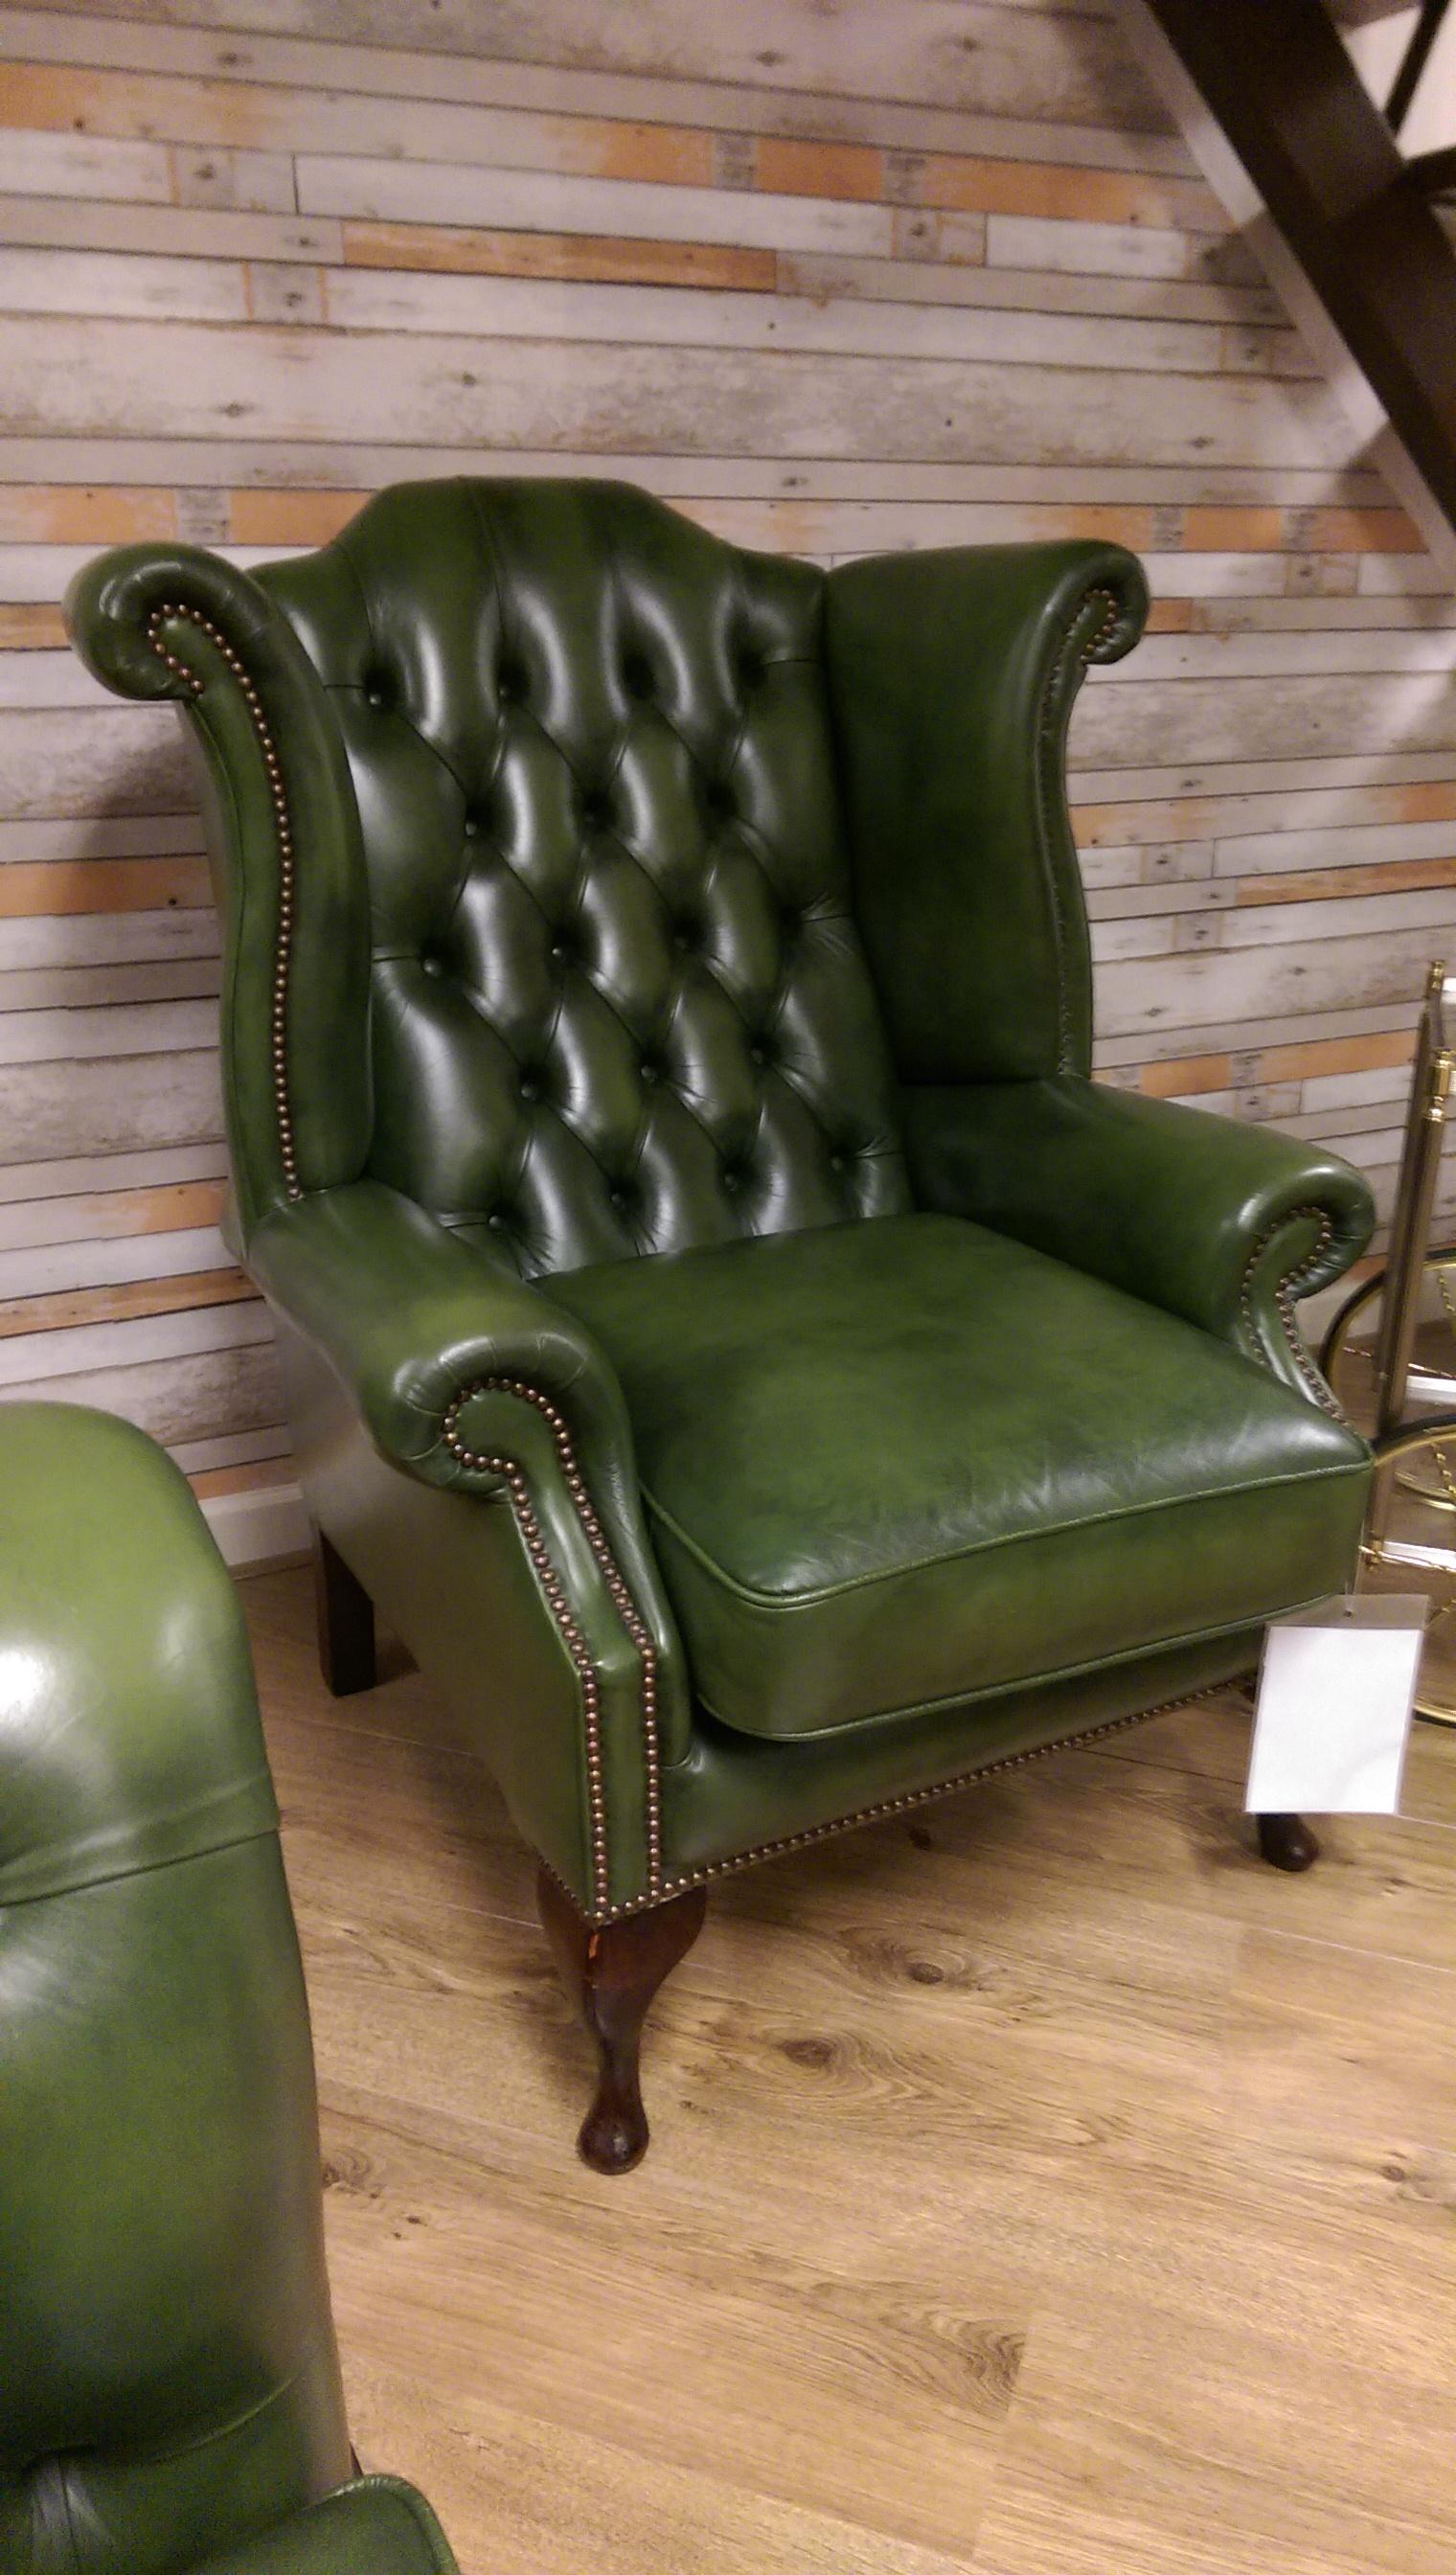 Pre-owned olive green Chesterfield wingchair from 2005. Cowhide leather in Antique olive Green rub-off standard finish. Stunning state, like new but than with a little more character.

Wooden Queen Anne legs. Very elegant chair to put next to your